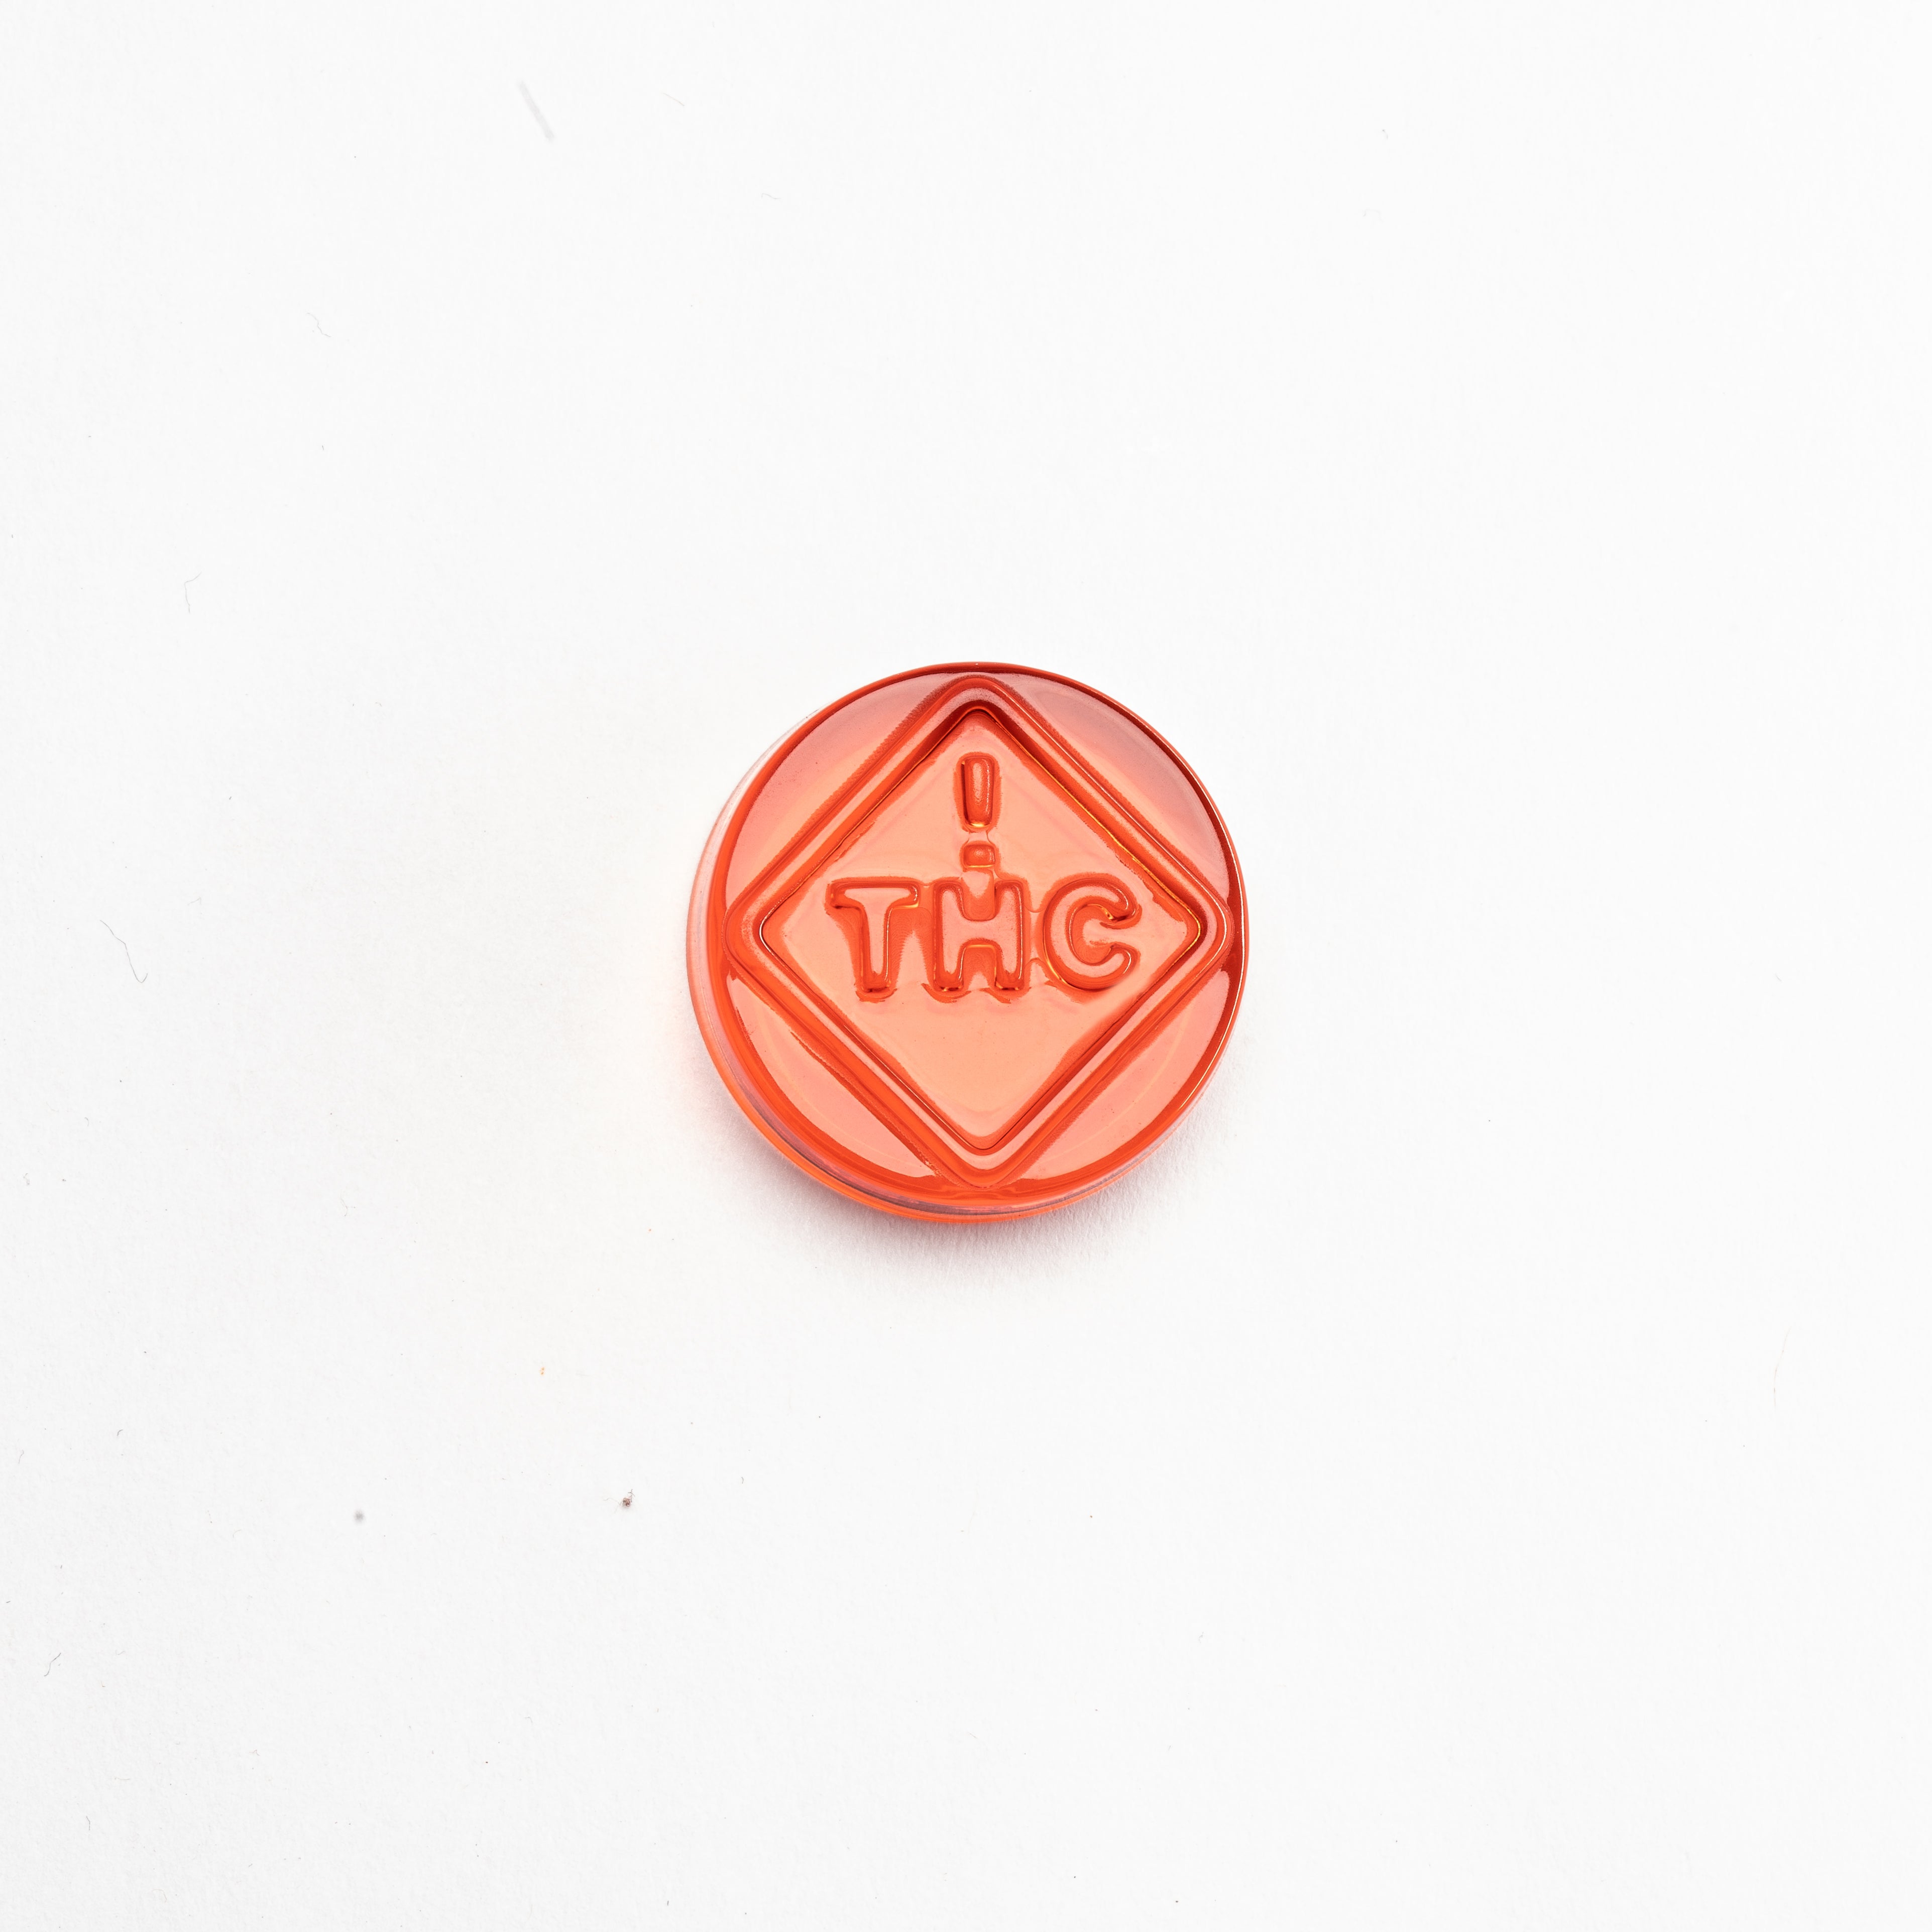 3mL Round Candy Depositor Mold - CO, FL, NM, OH THC Symbol - 104 Cavities - 22050